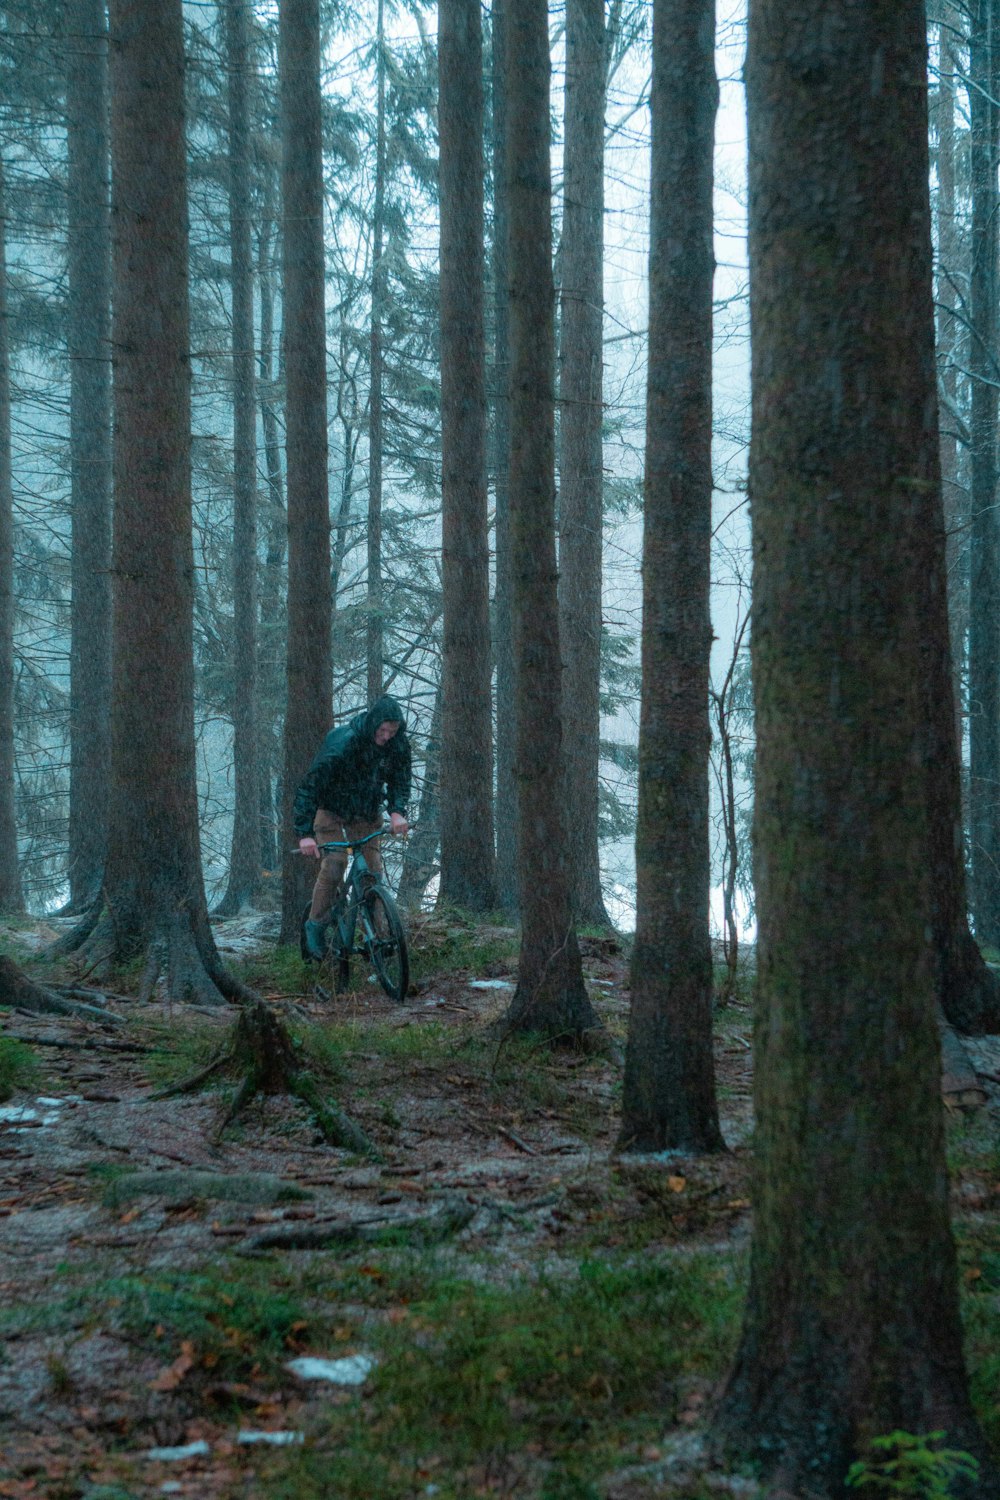 man in black jacket riding bicycle in the woods